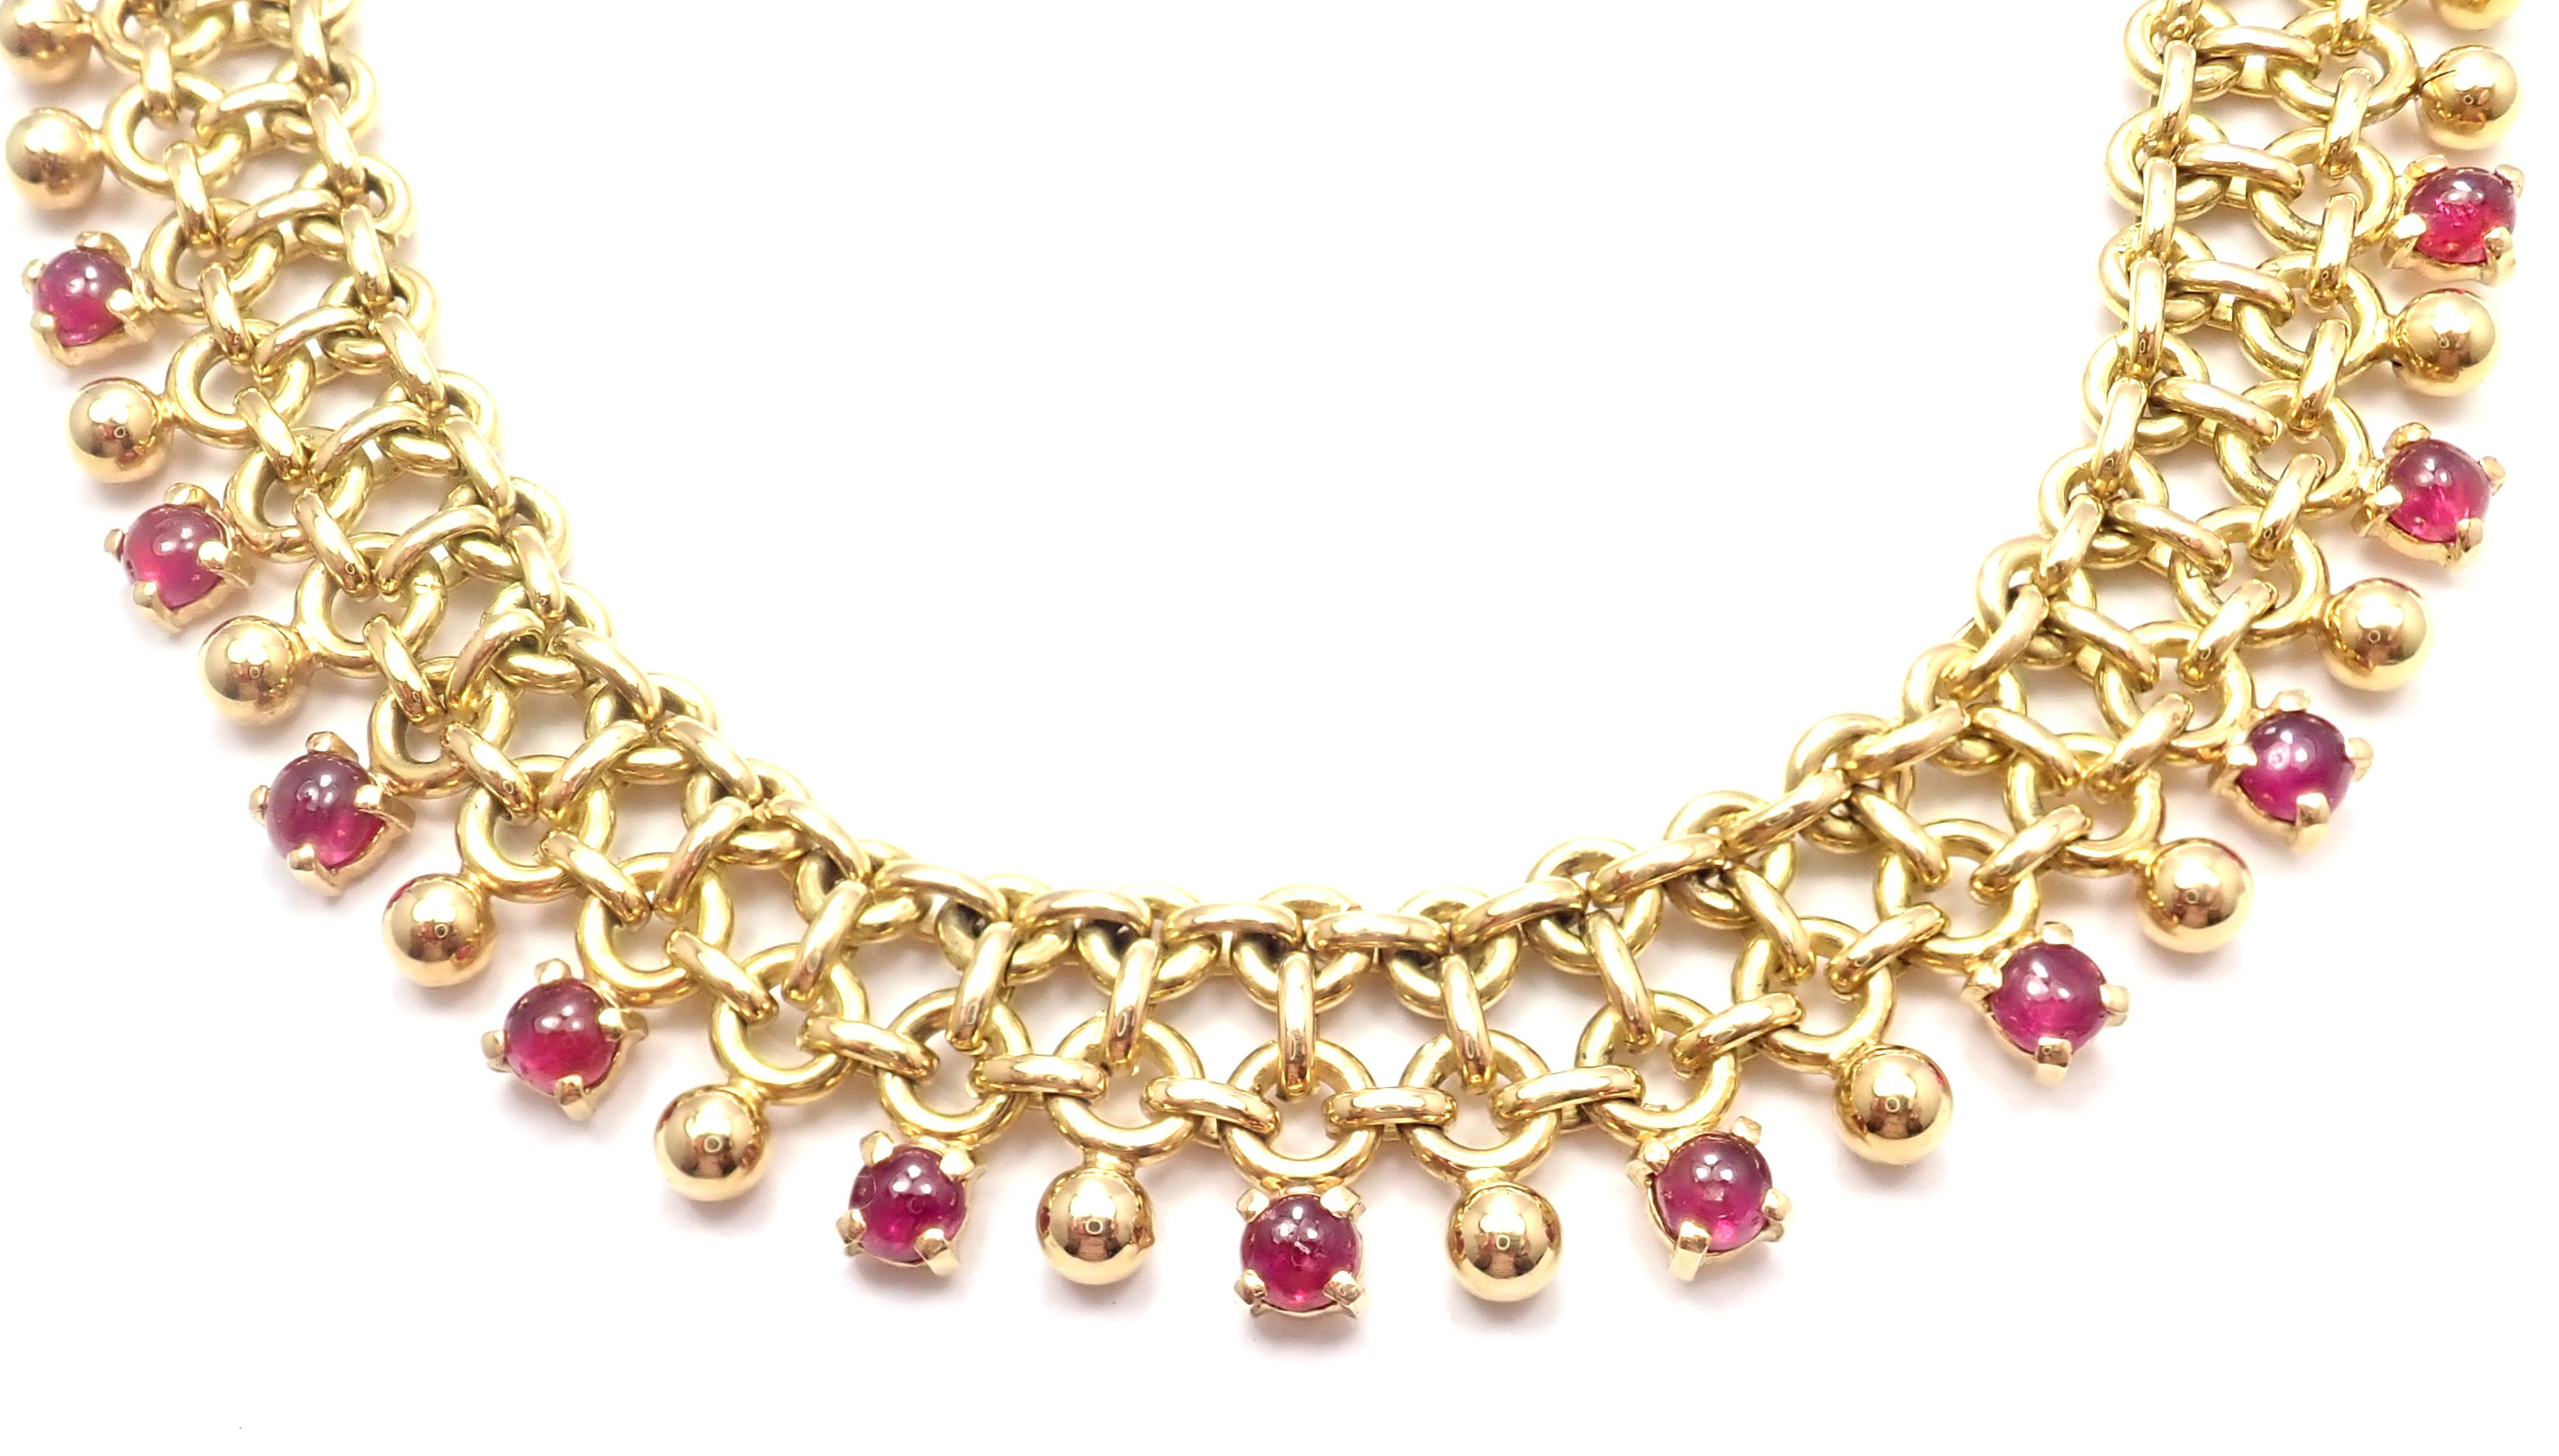 Vintage Tiffany & Co. Ruby Collar Yellow Gold Necklace In Excellent Condition For Sale In Holland, PA